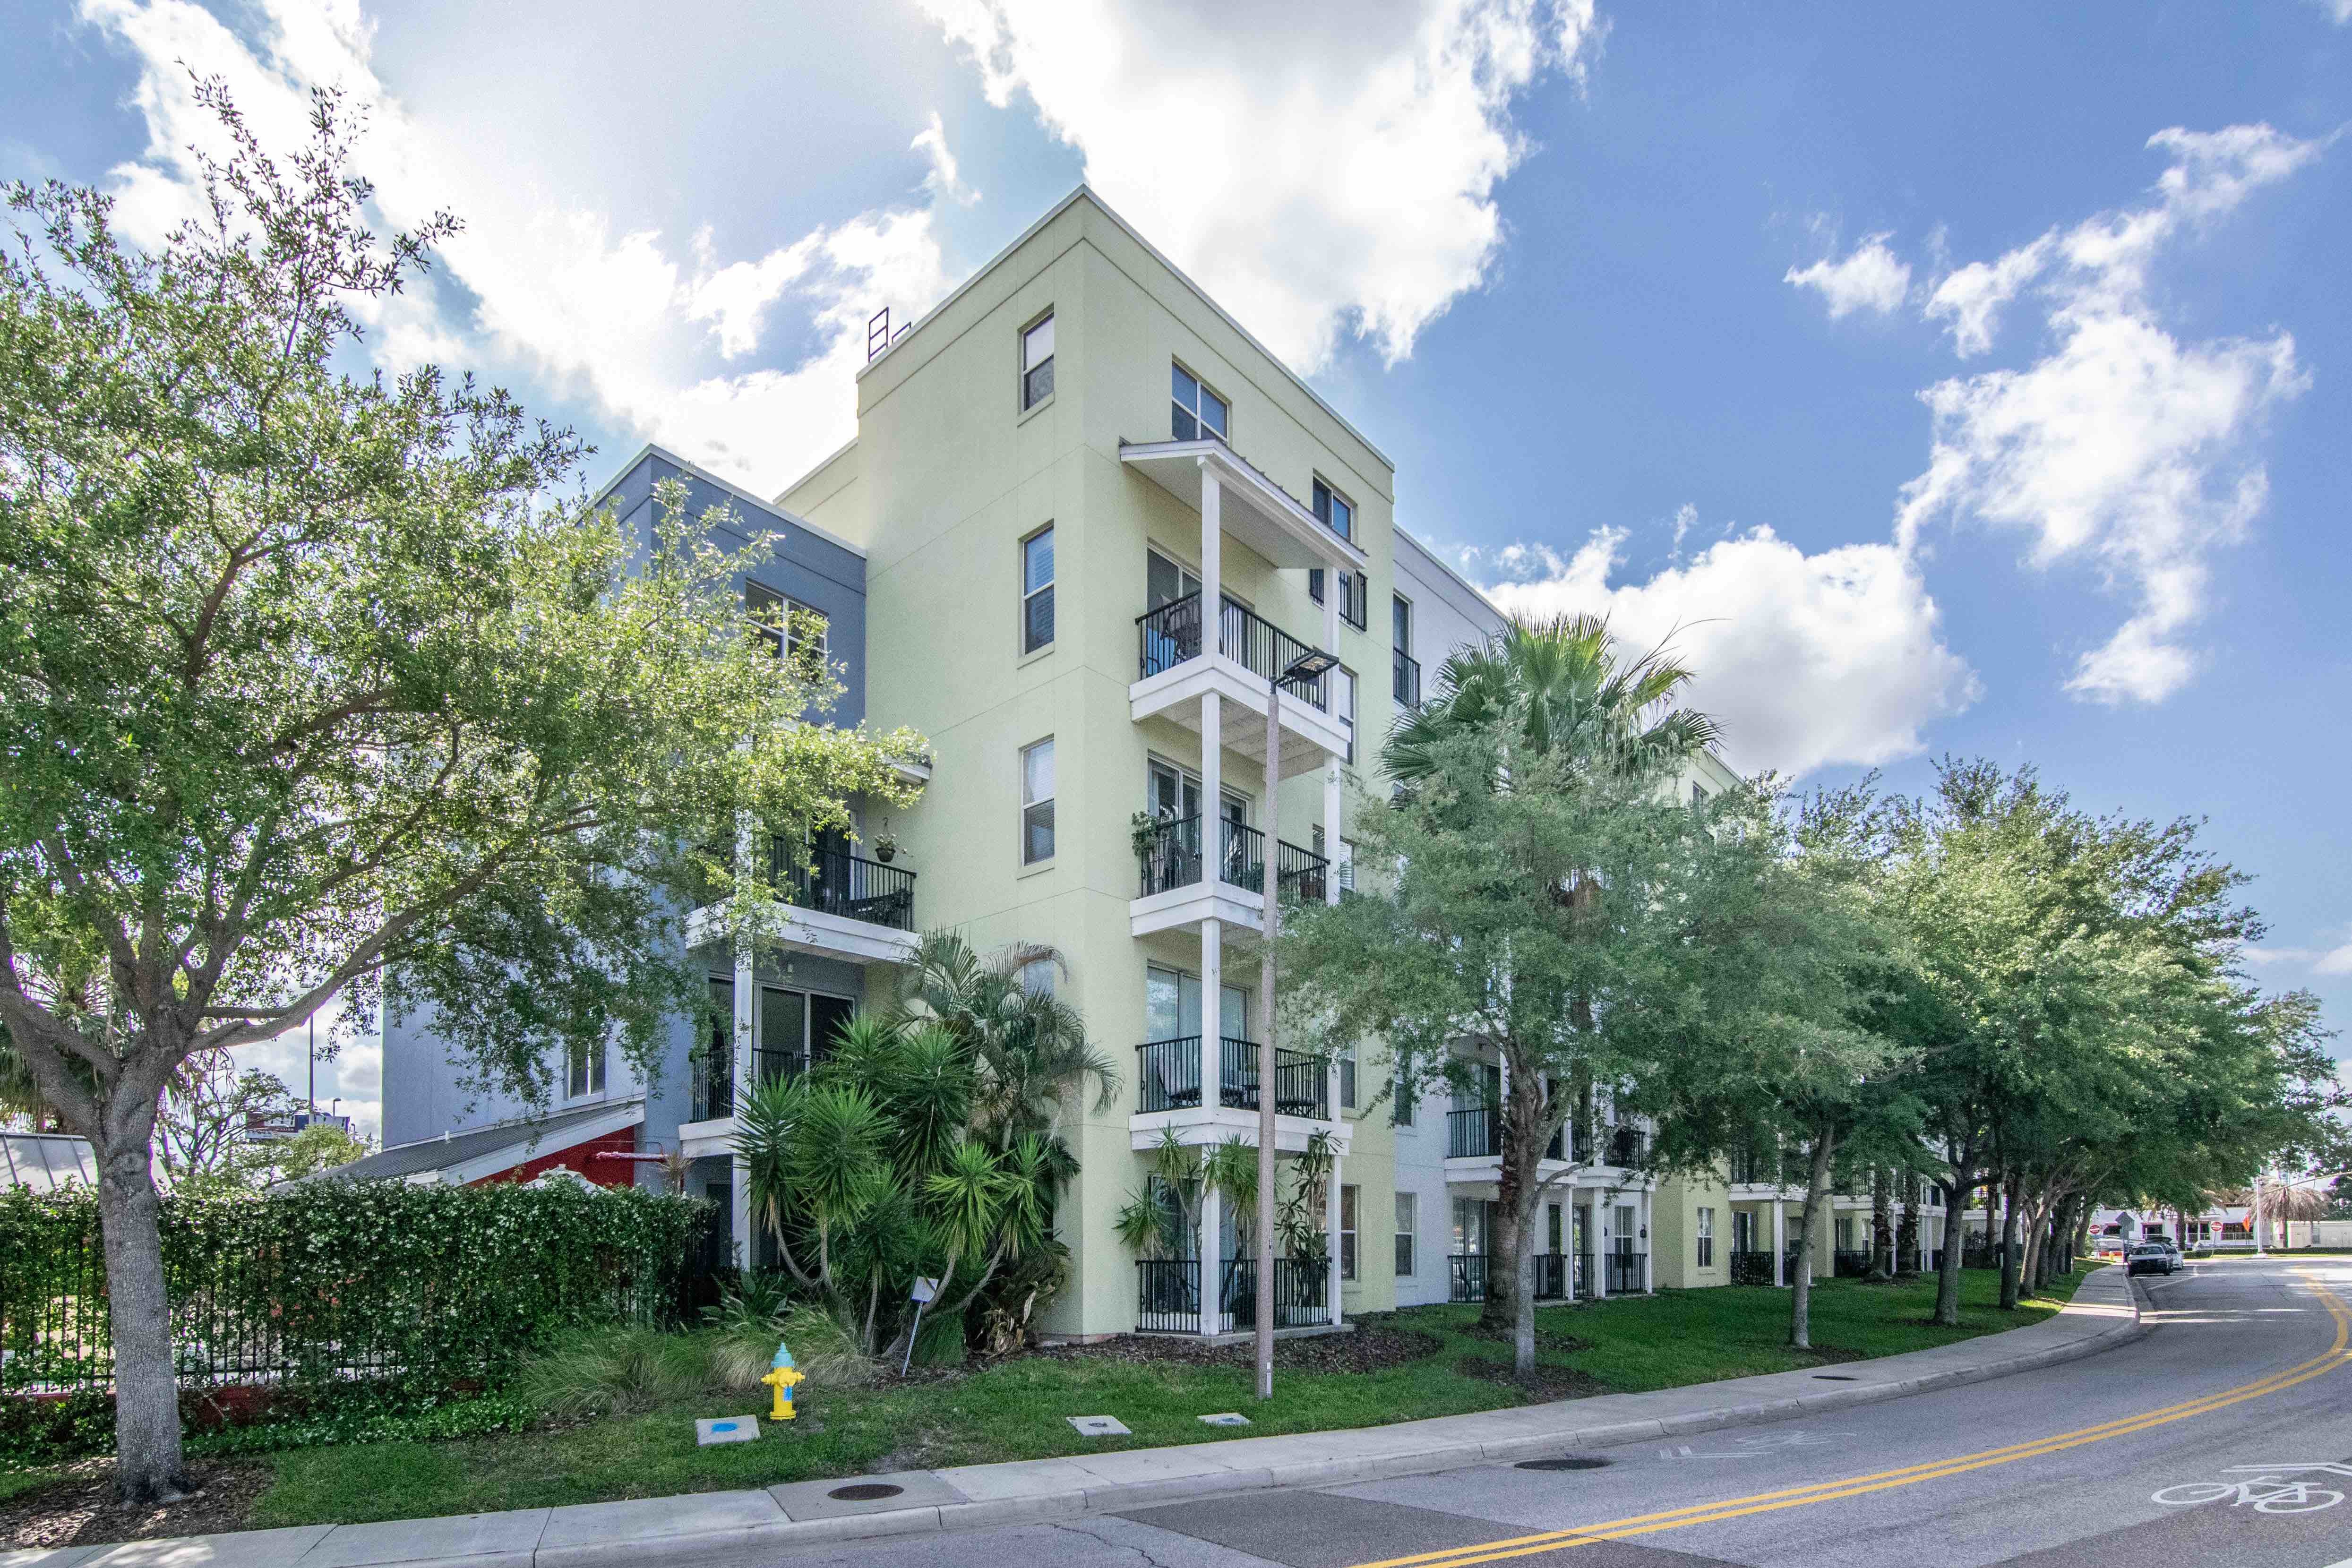 Art Center Lofts, N Franklin St. Historic District, Florida Condos for Sale in Tampa